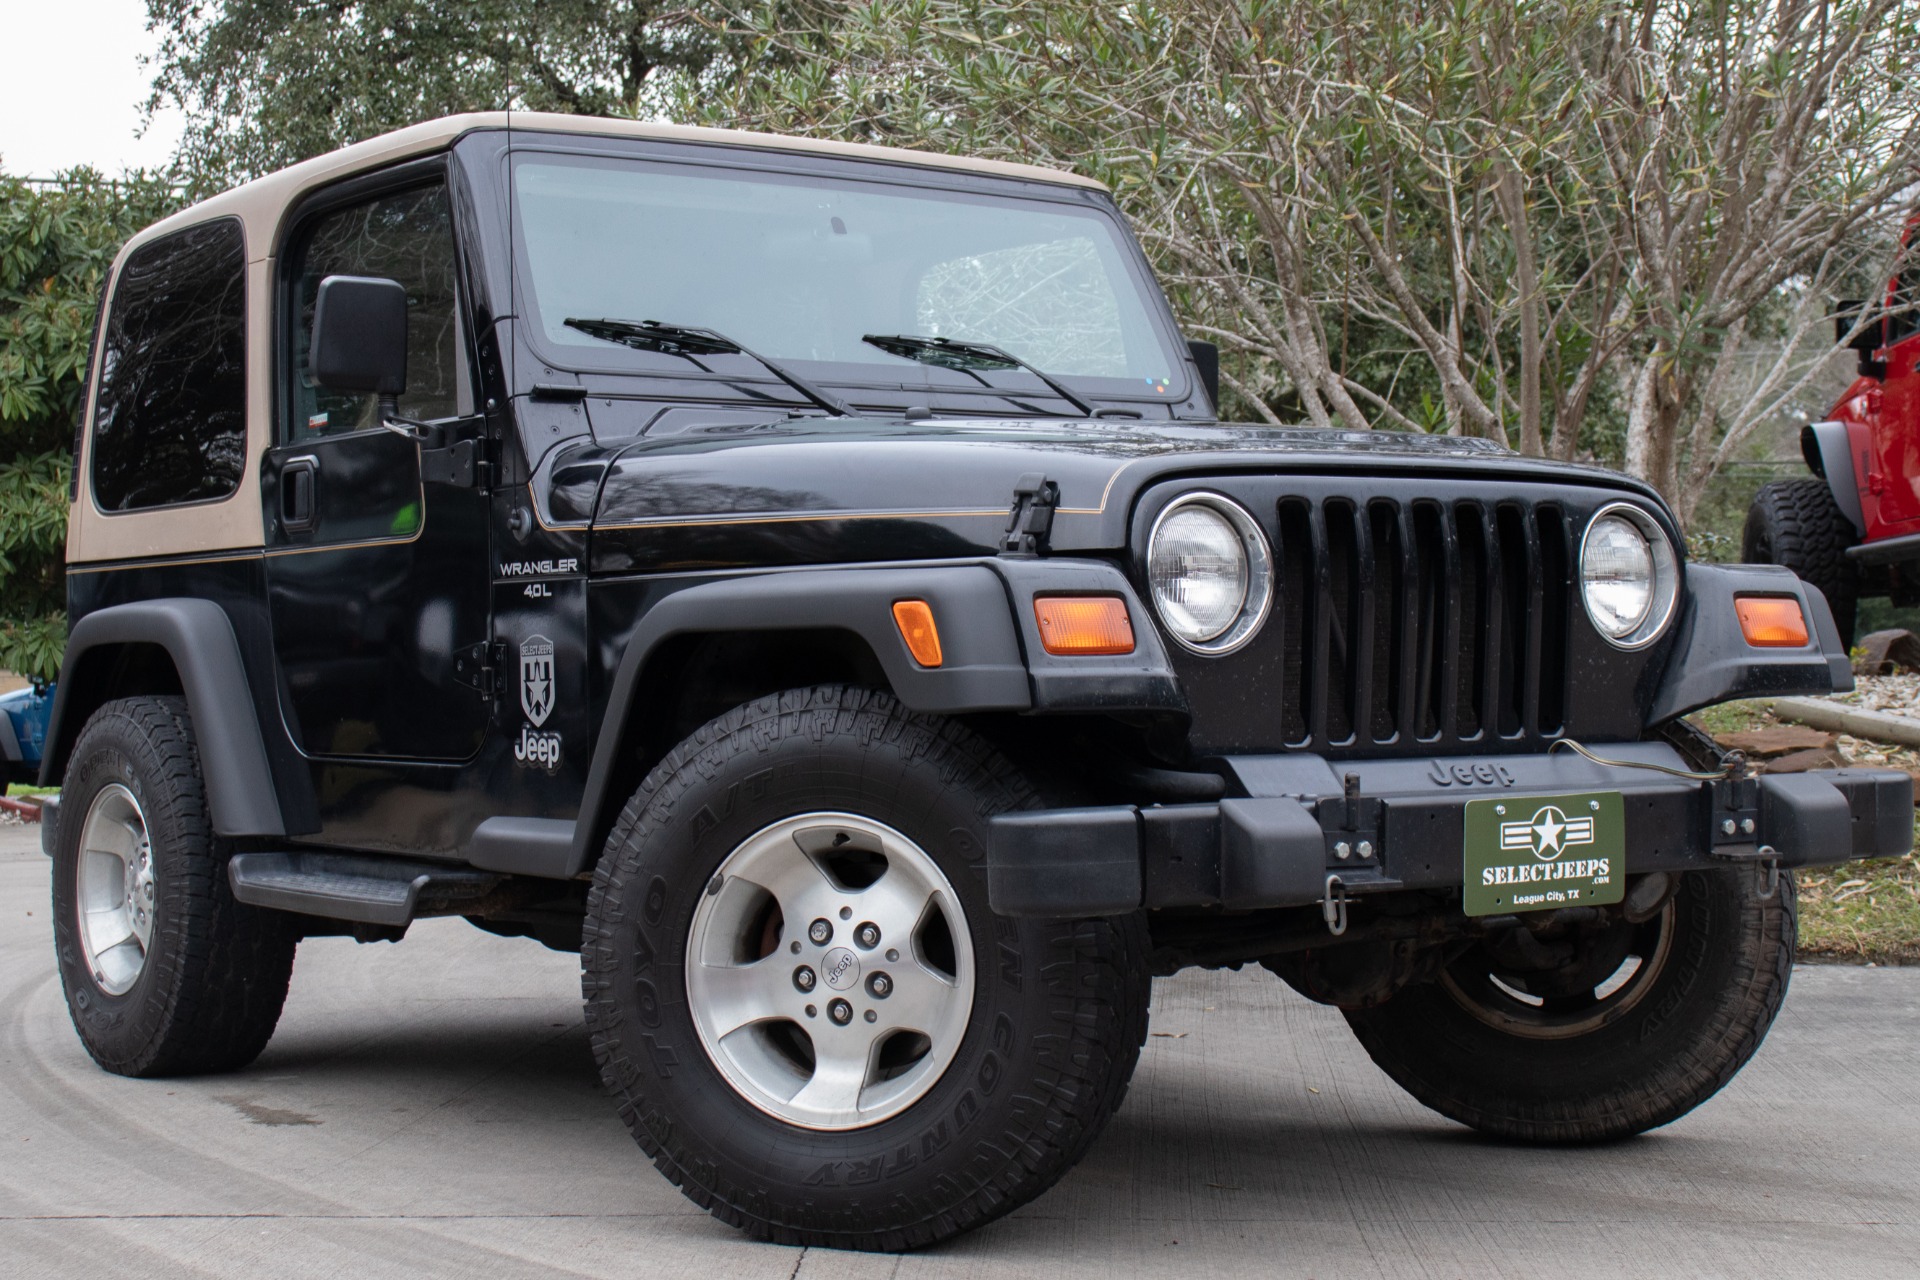 Used 1999 Jeep Wrangler Sport For Sale ($12,995) | Select Jeeps Inc. Stock  #453856